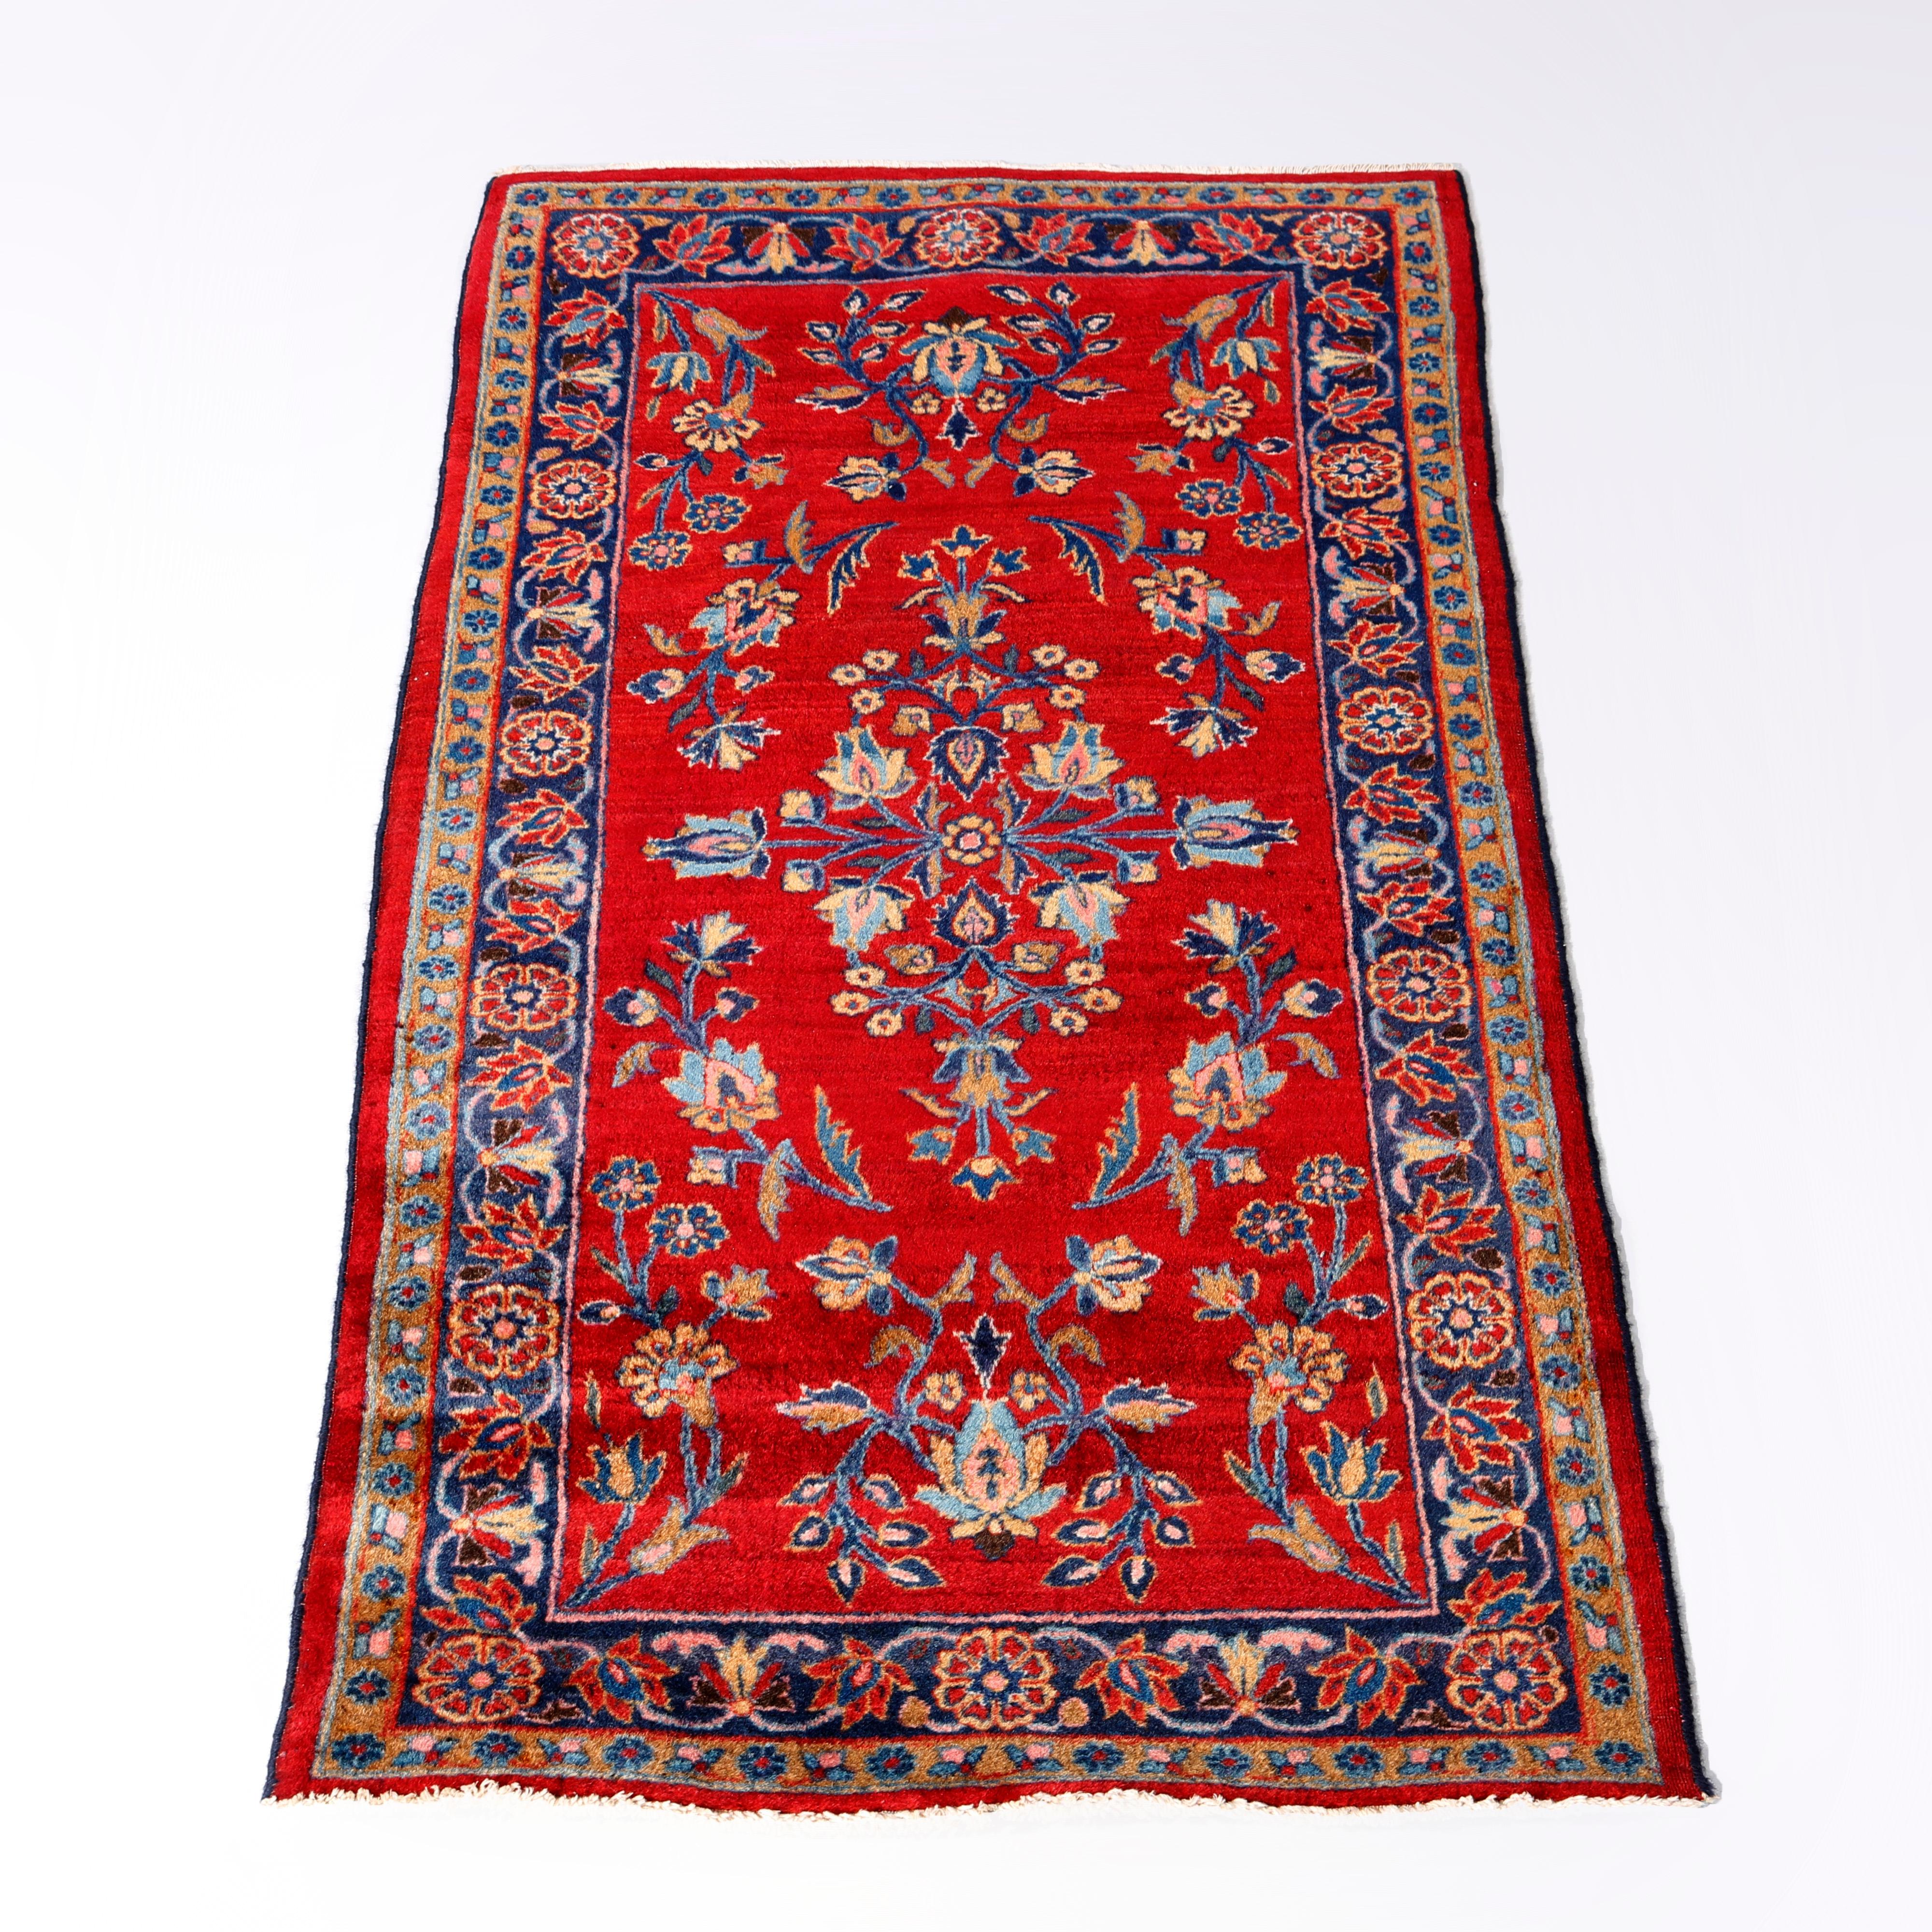 An antique Persian Kashan oriental rug offers wool construction with foliate and floral elements on a red ground, c1930

Measures - 48.5''L x 26.5''W x .5''D.

Catalogue Note: Ask about DISCOUNTED DELIVERY RATES available to most regions within